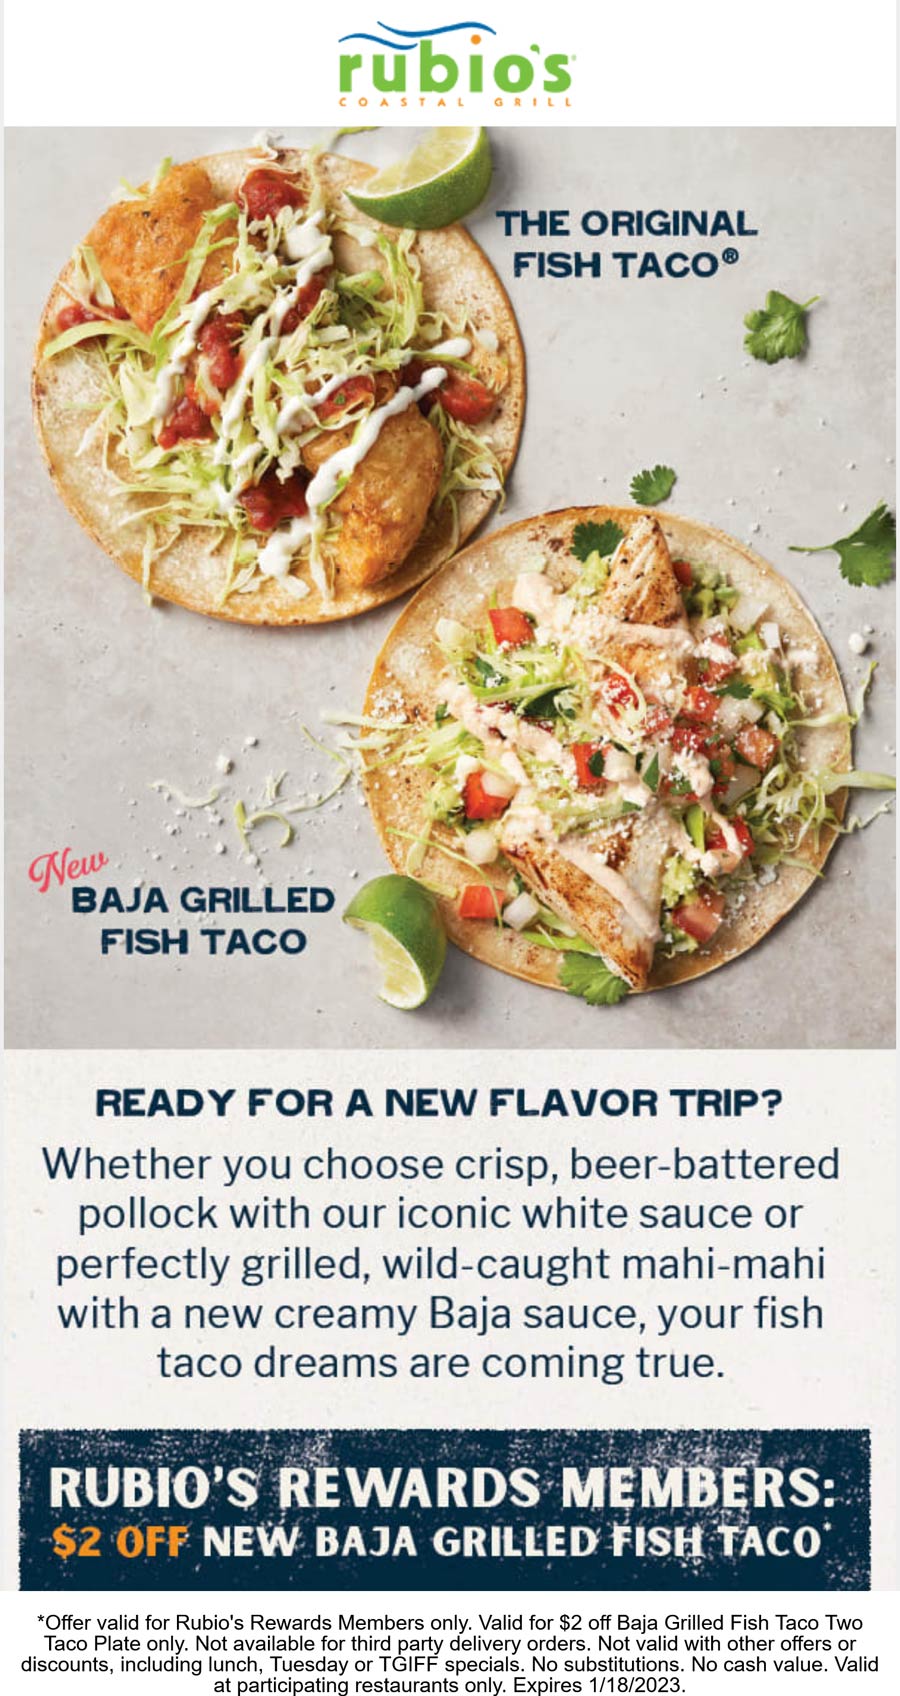 Rubios restaurants Coupon  $2 off grilled fish taco plate at Rubios #rubios 